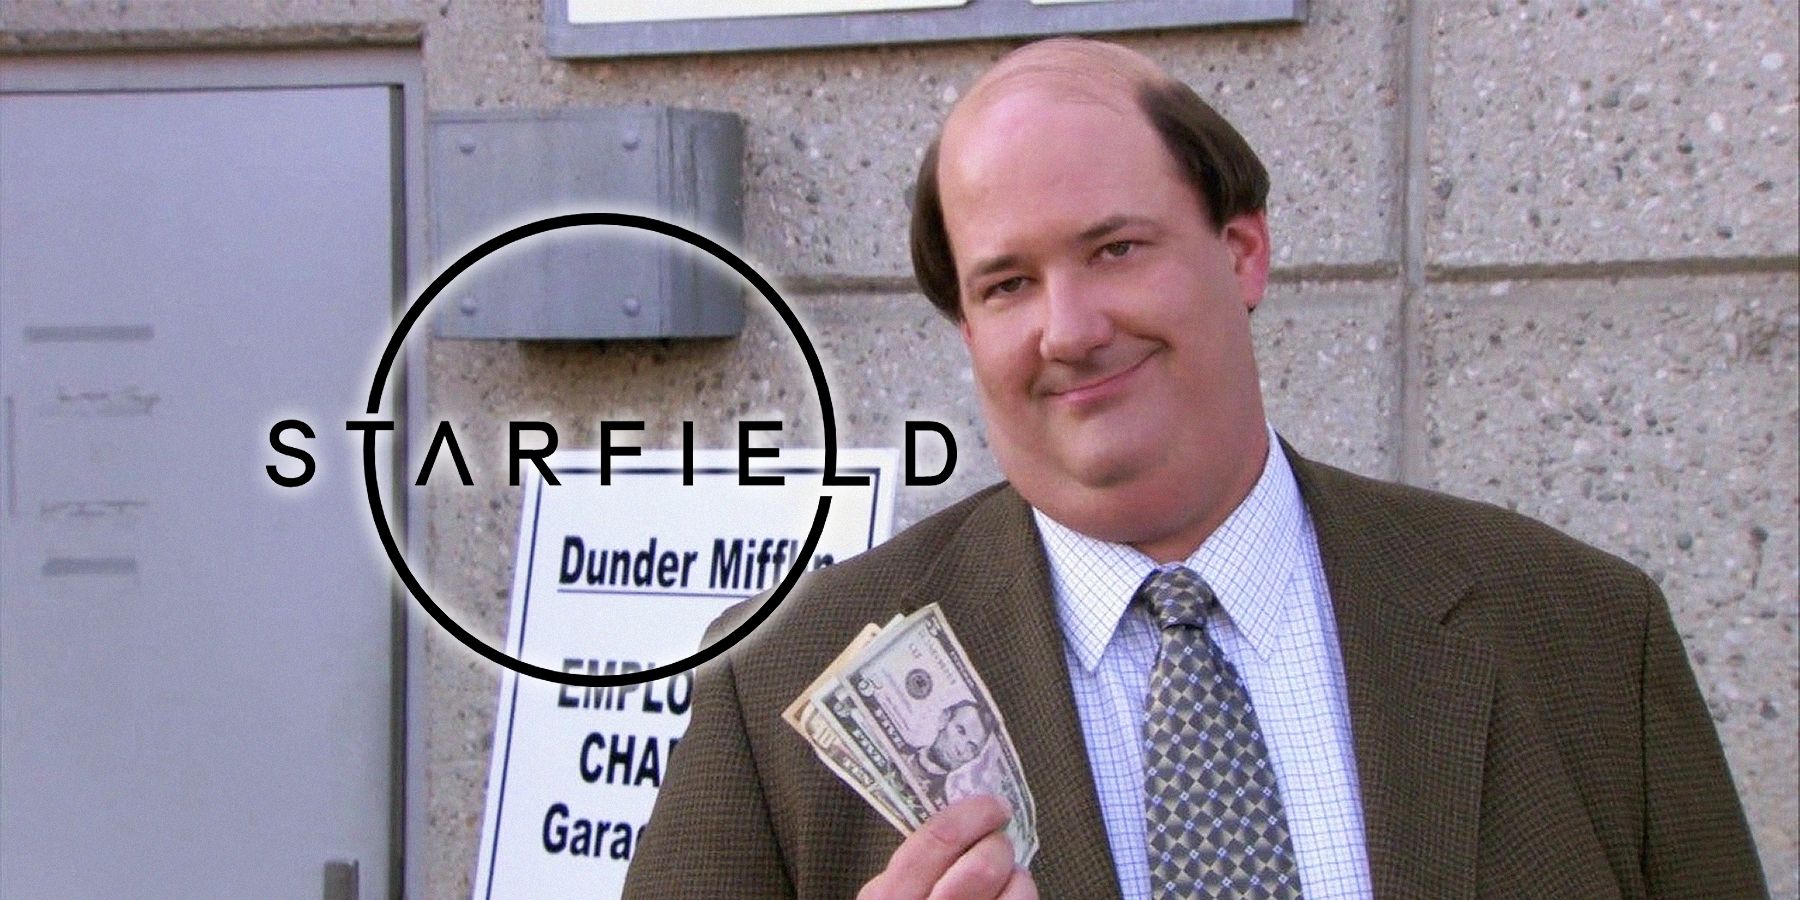 starfield office reference kevin malone famous chili cold open